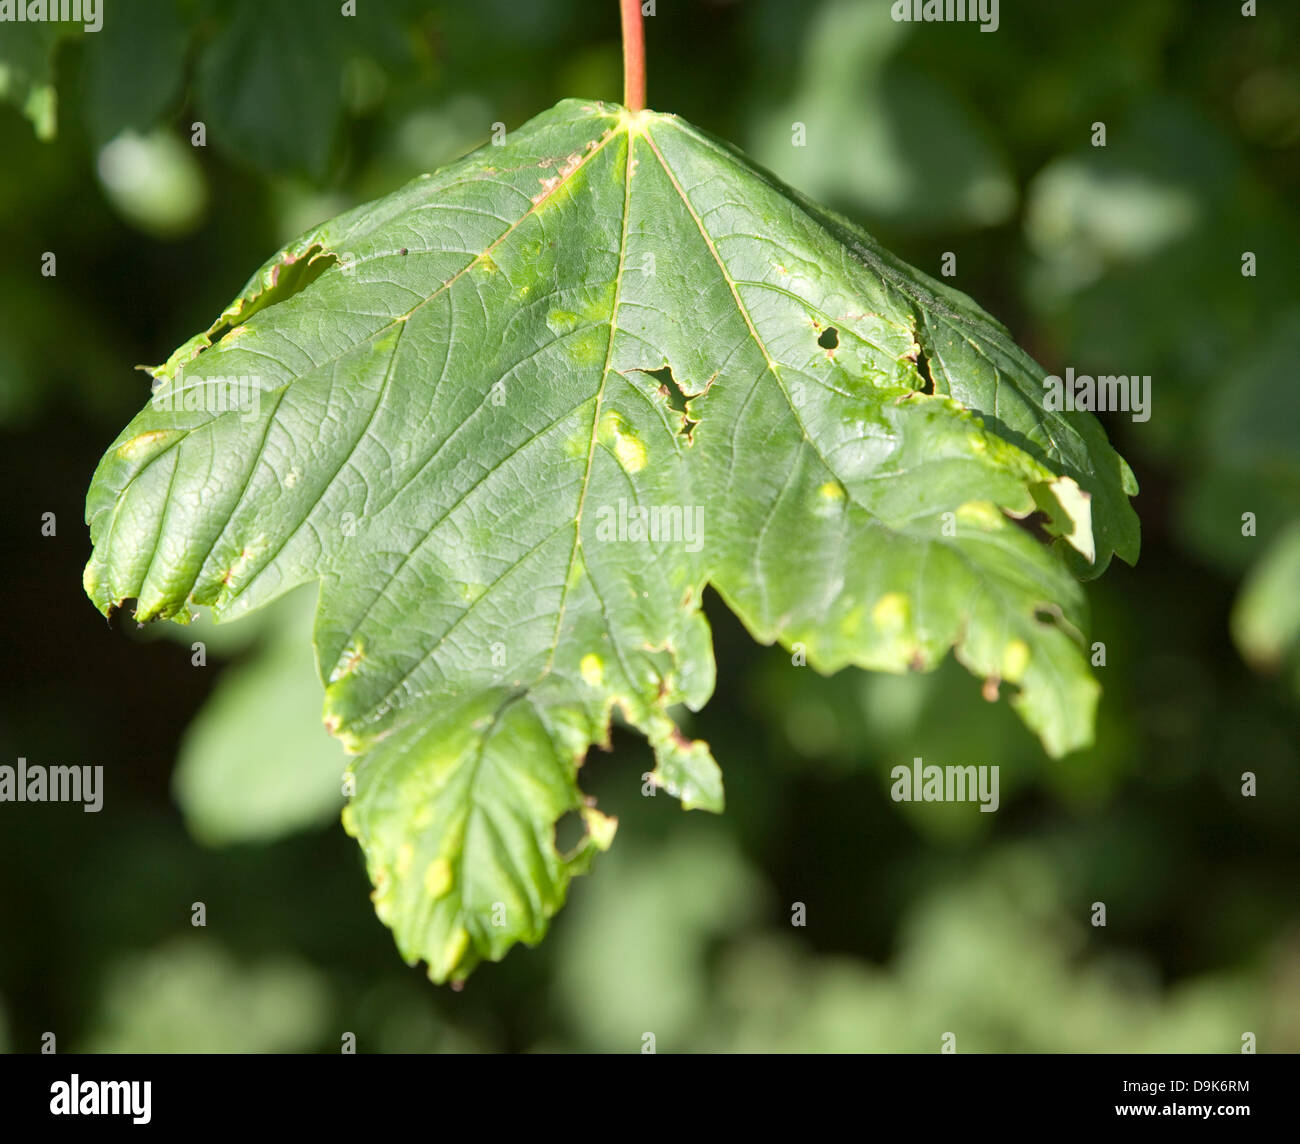 Blotched patches on sycamore tree leaf caused by erineum galls - the work of Eriophyes mites Stock Photo